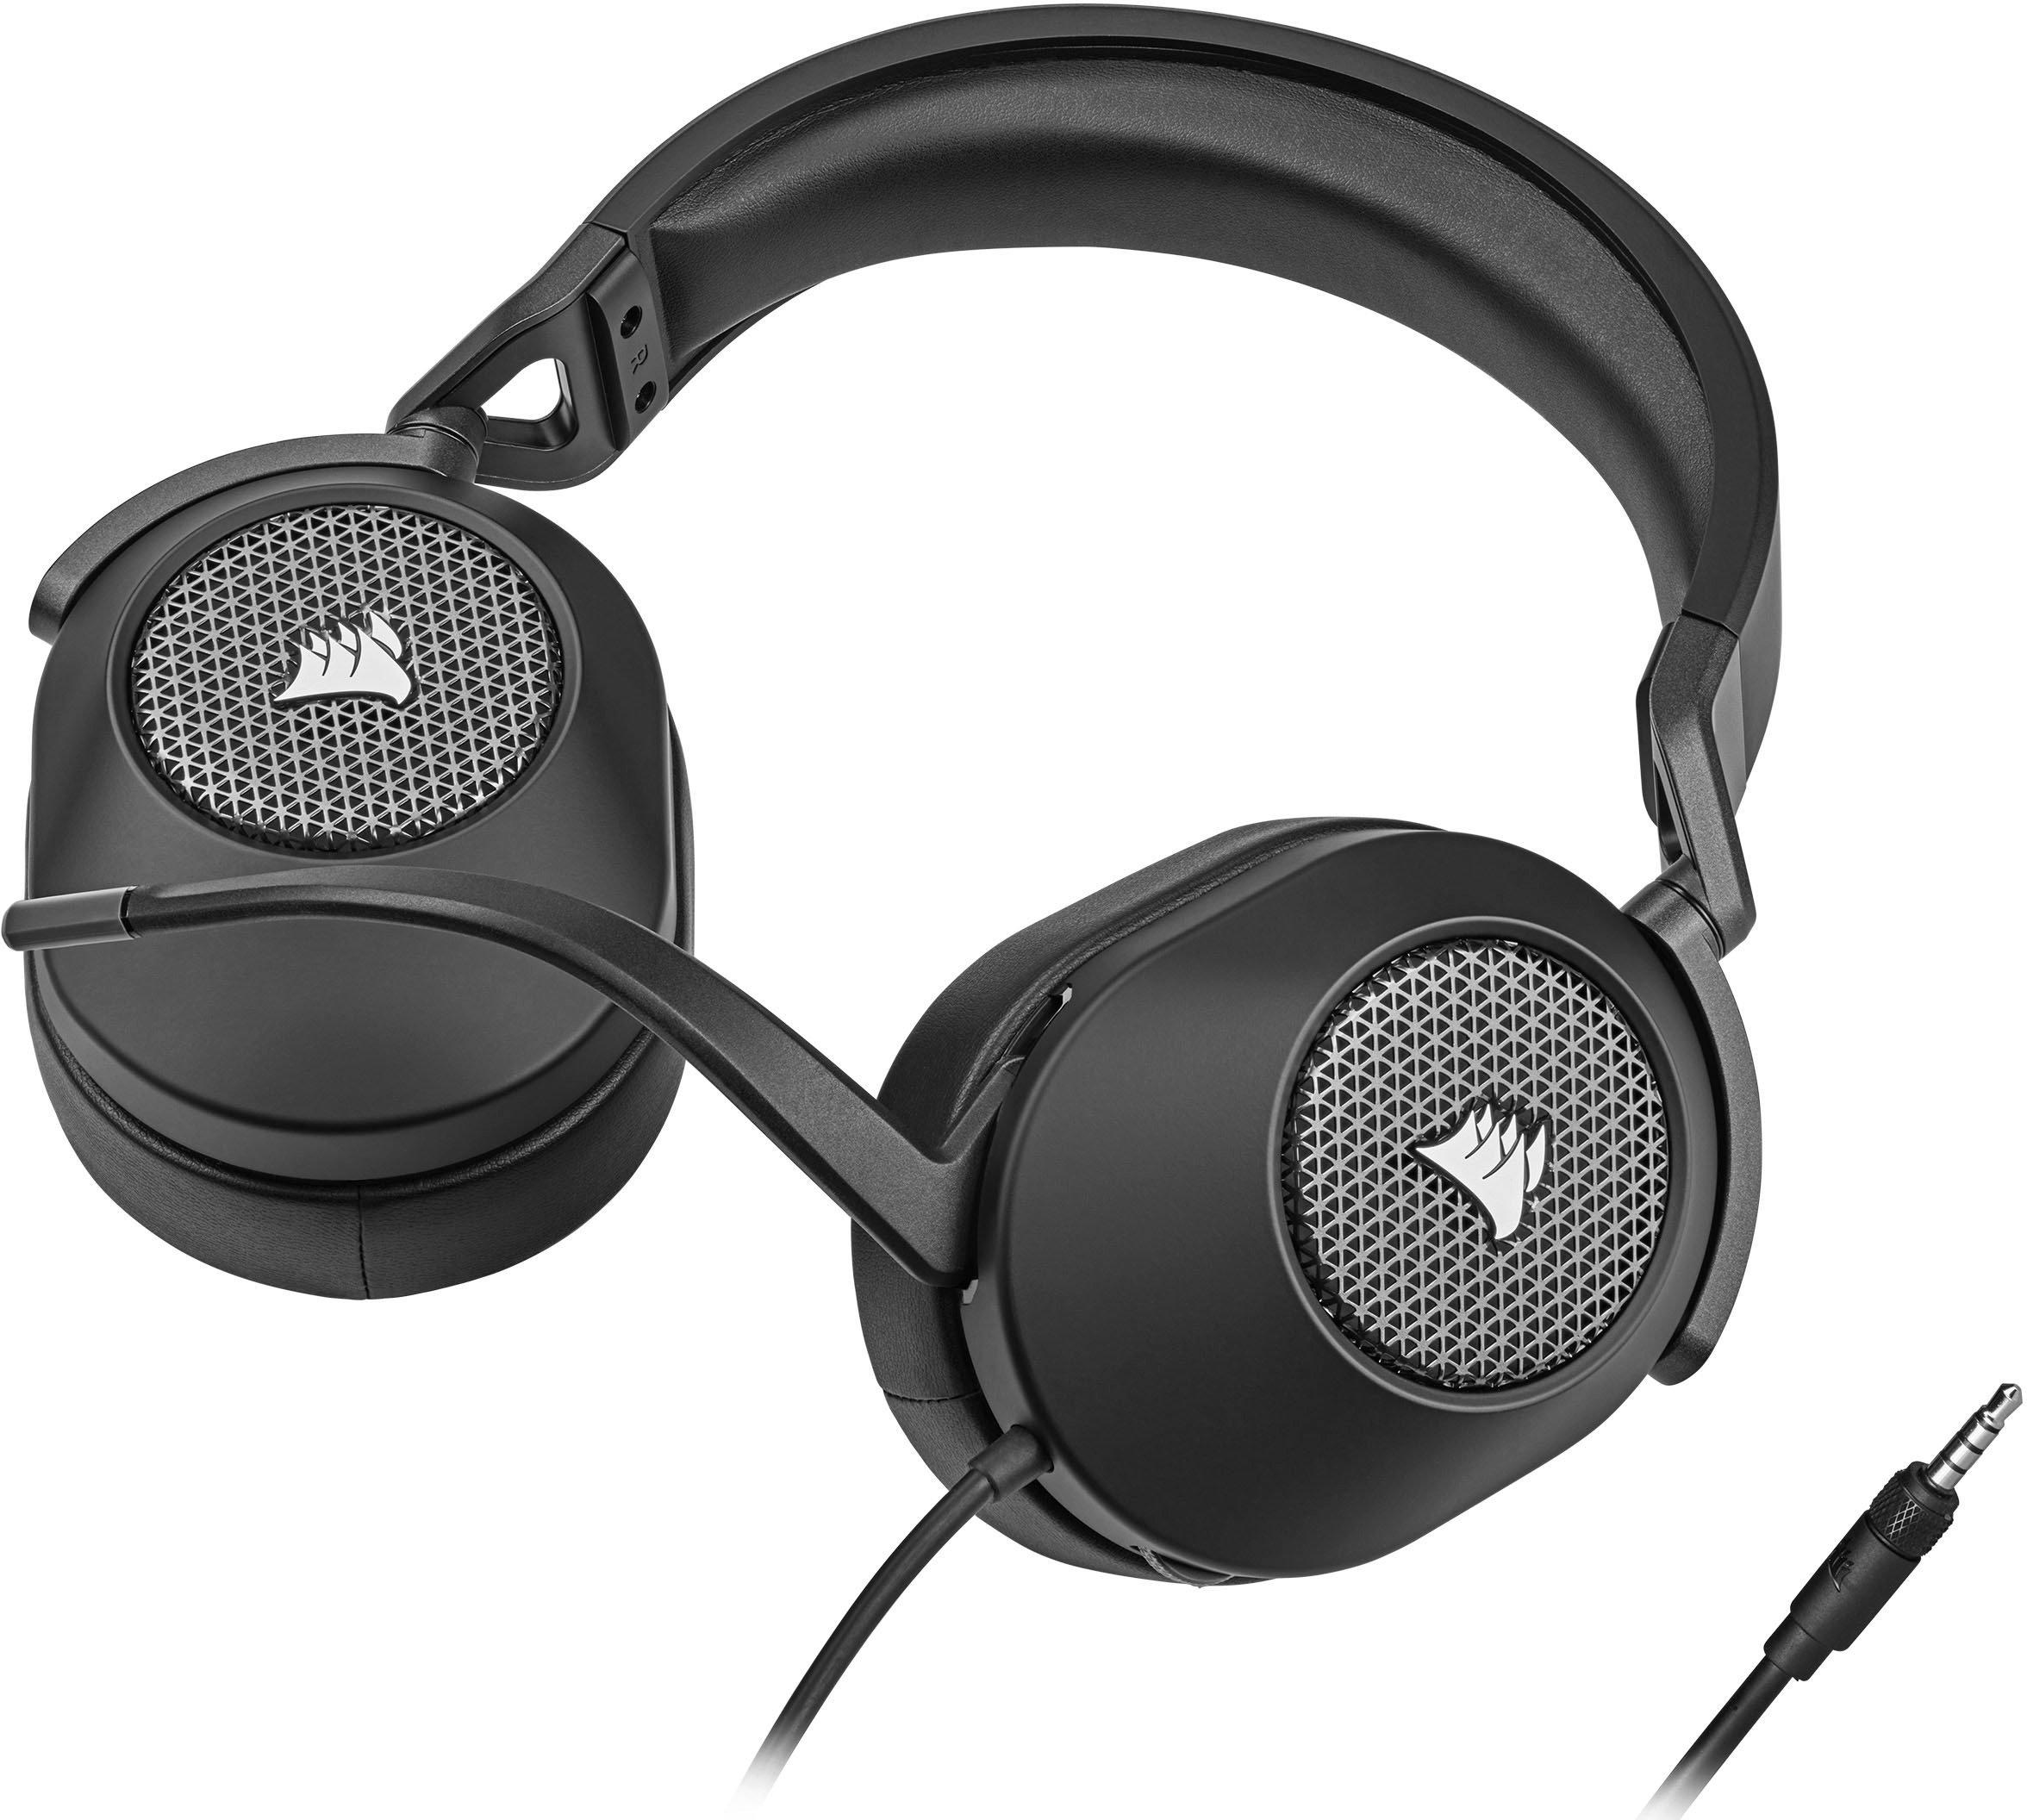  Corsair HS65 SURROUND Gaming Headset (Leatherette Memory Foam  Ear Pads, Dolby Audio 7.1 Surround Sound on PC and Mac, SonarWorks SoundID  Technology, Multi-Platform Compatibility) Carbon : Everything Else